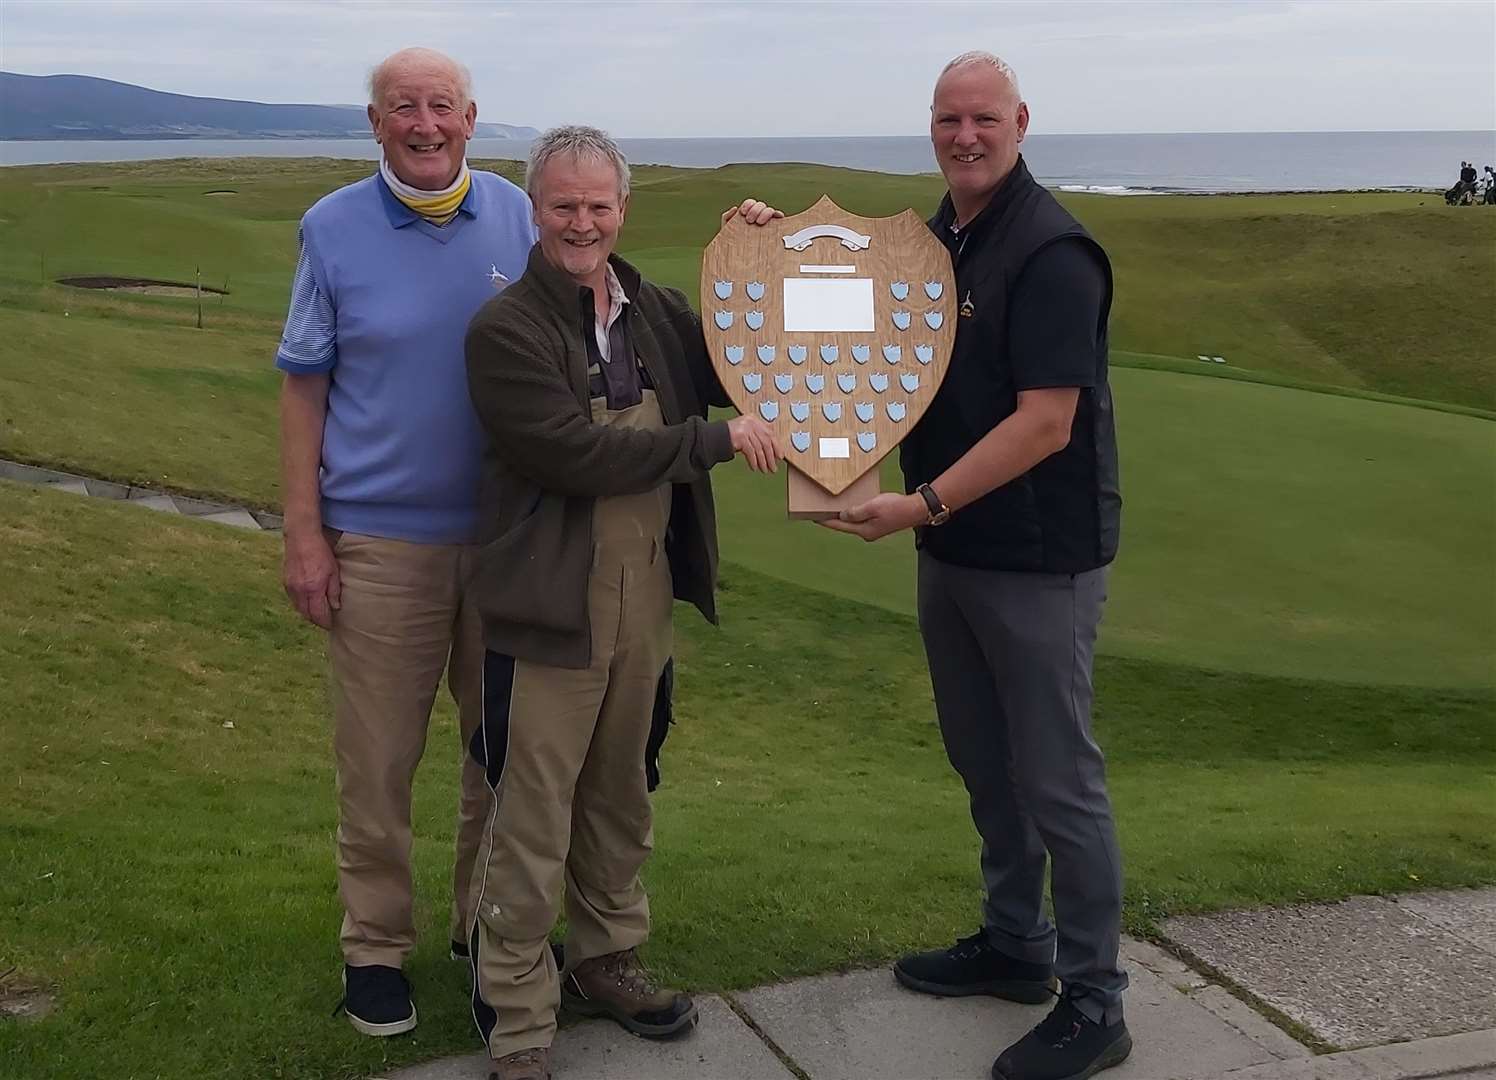 The new trophy was presented to BOBs' captain Mark Tunstall by Alistair Risk (left) and John Macgregor.